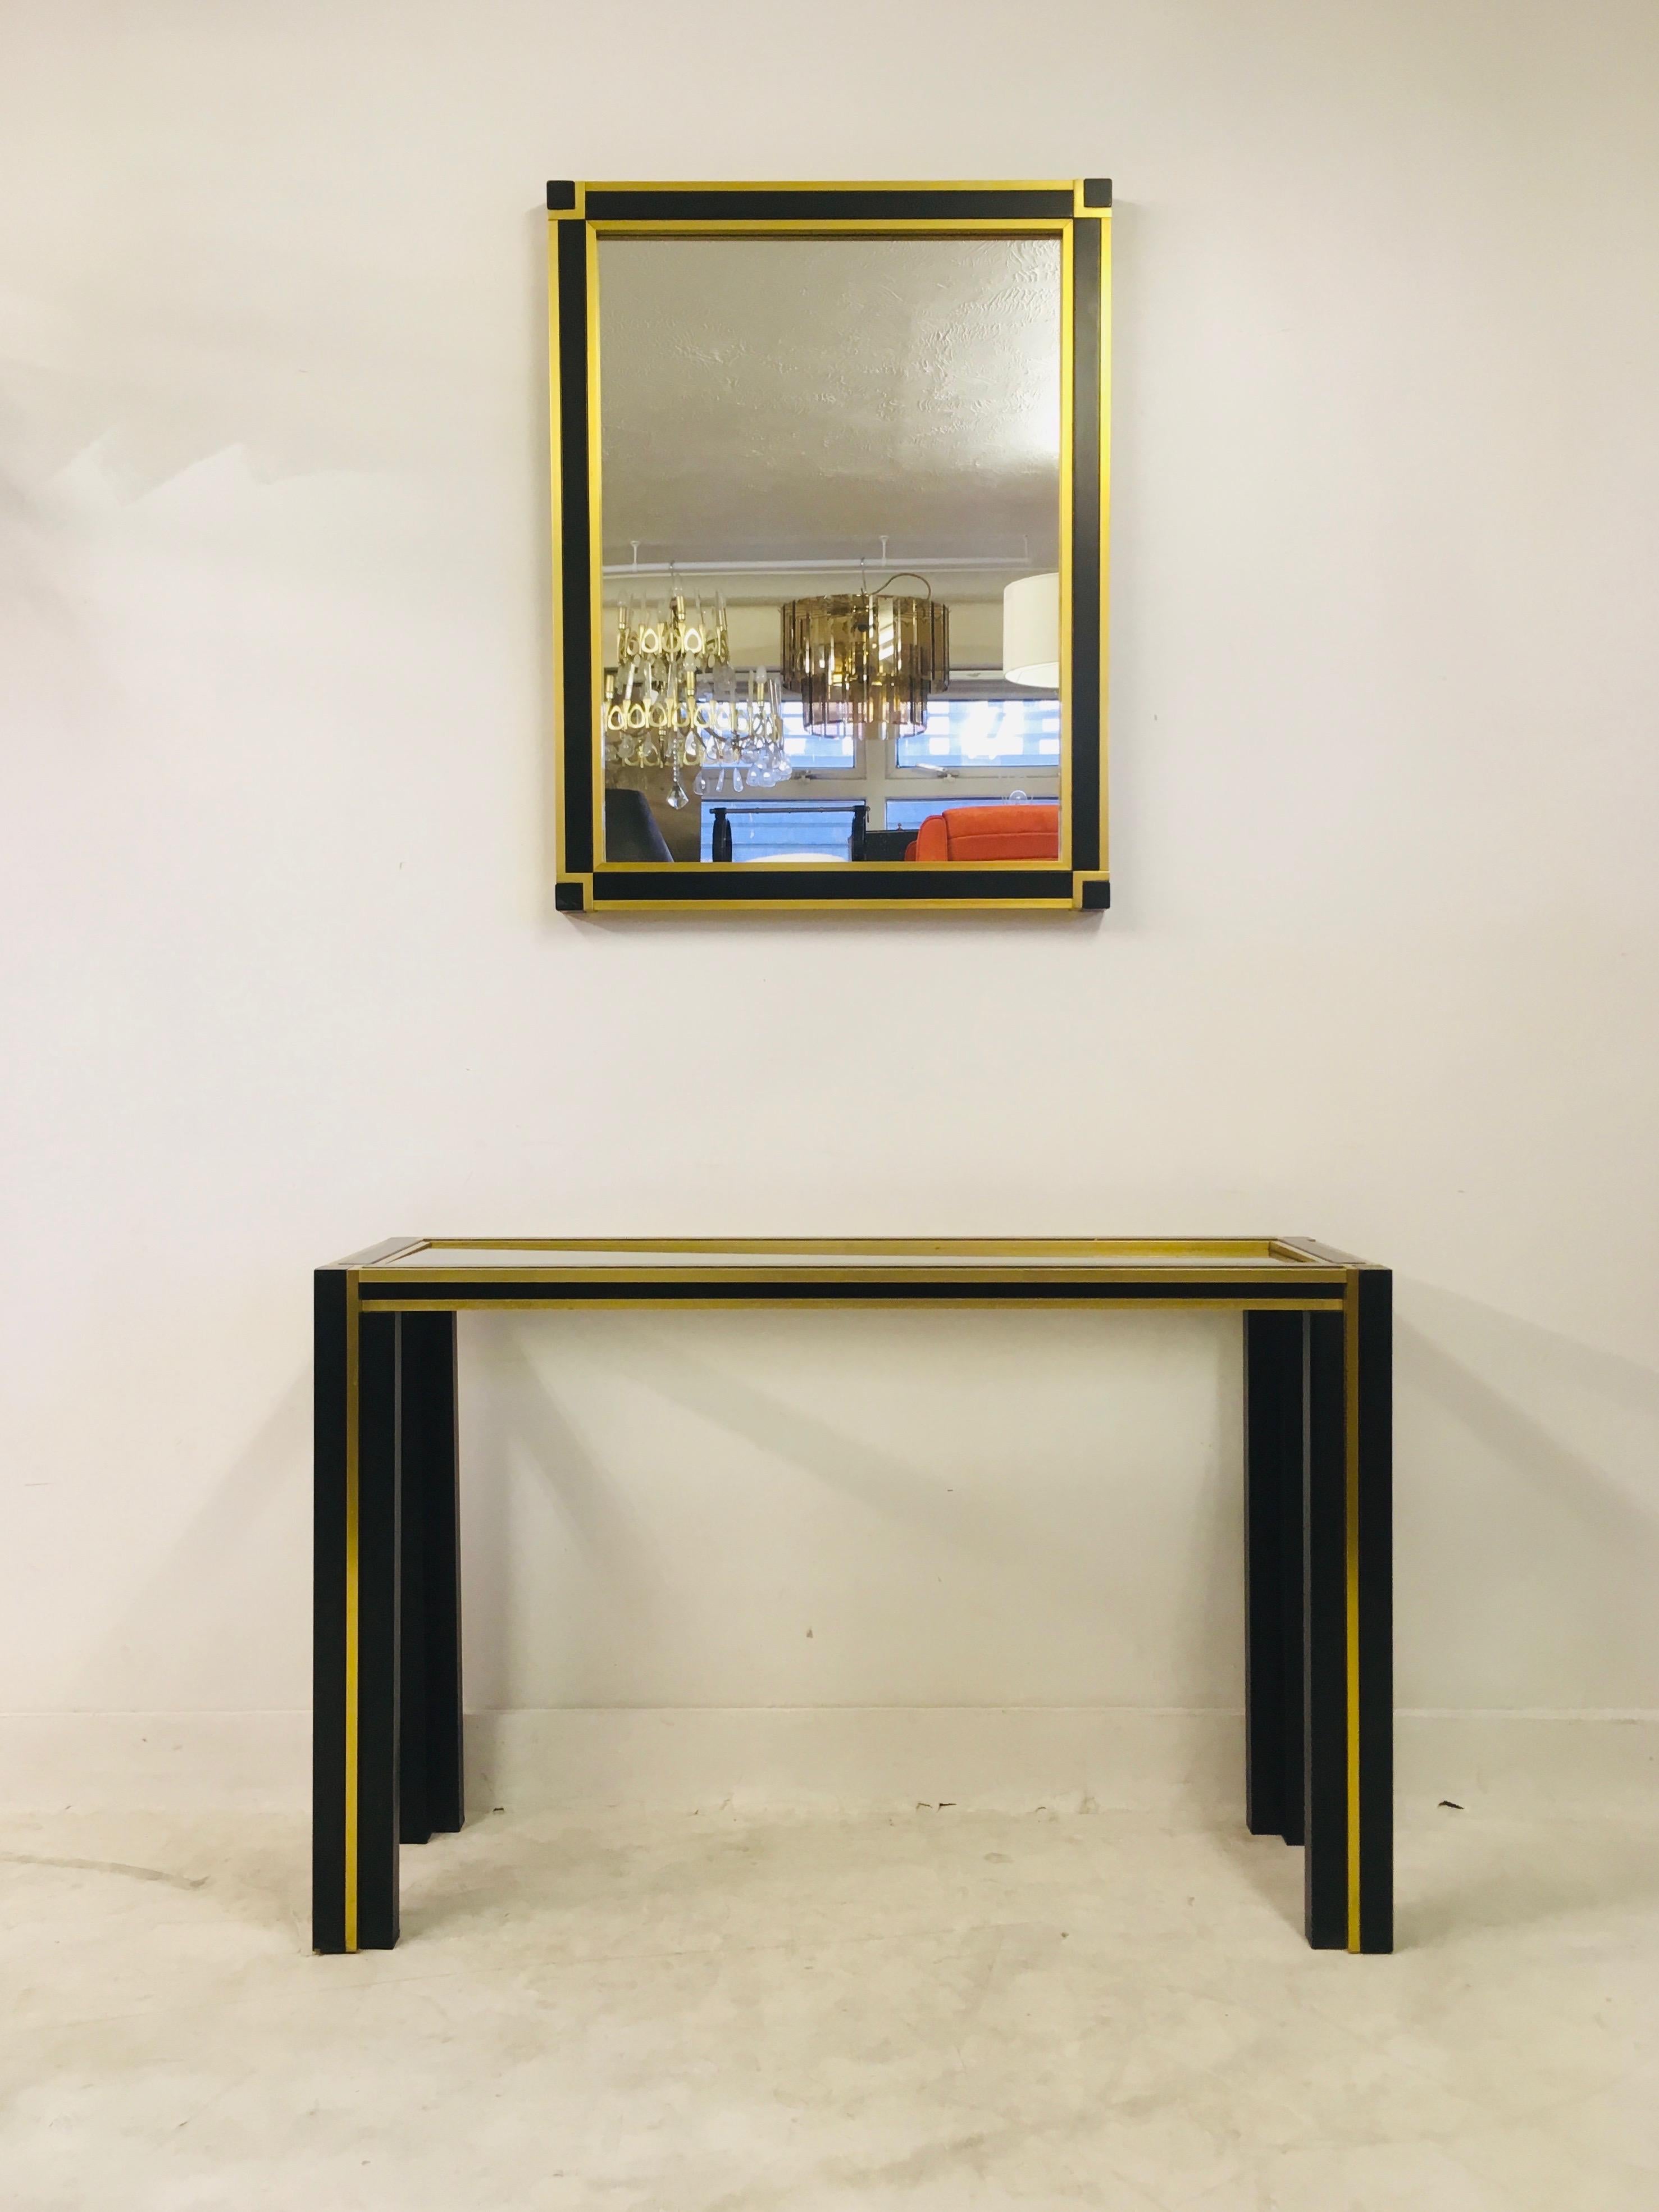 Vintage console table and mirror

Black metal frame

Brass banding

Mirror measures 90 x 70cm

Italy, 1970s.